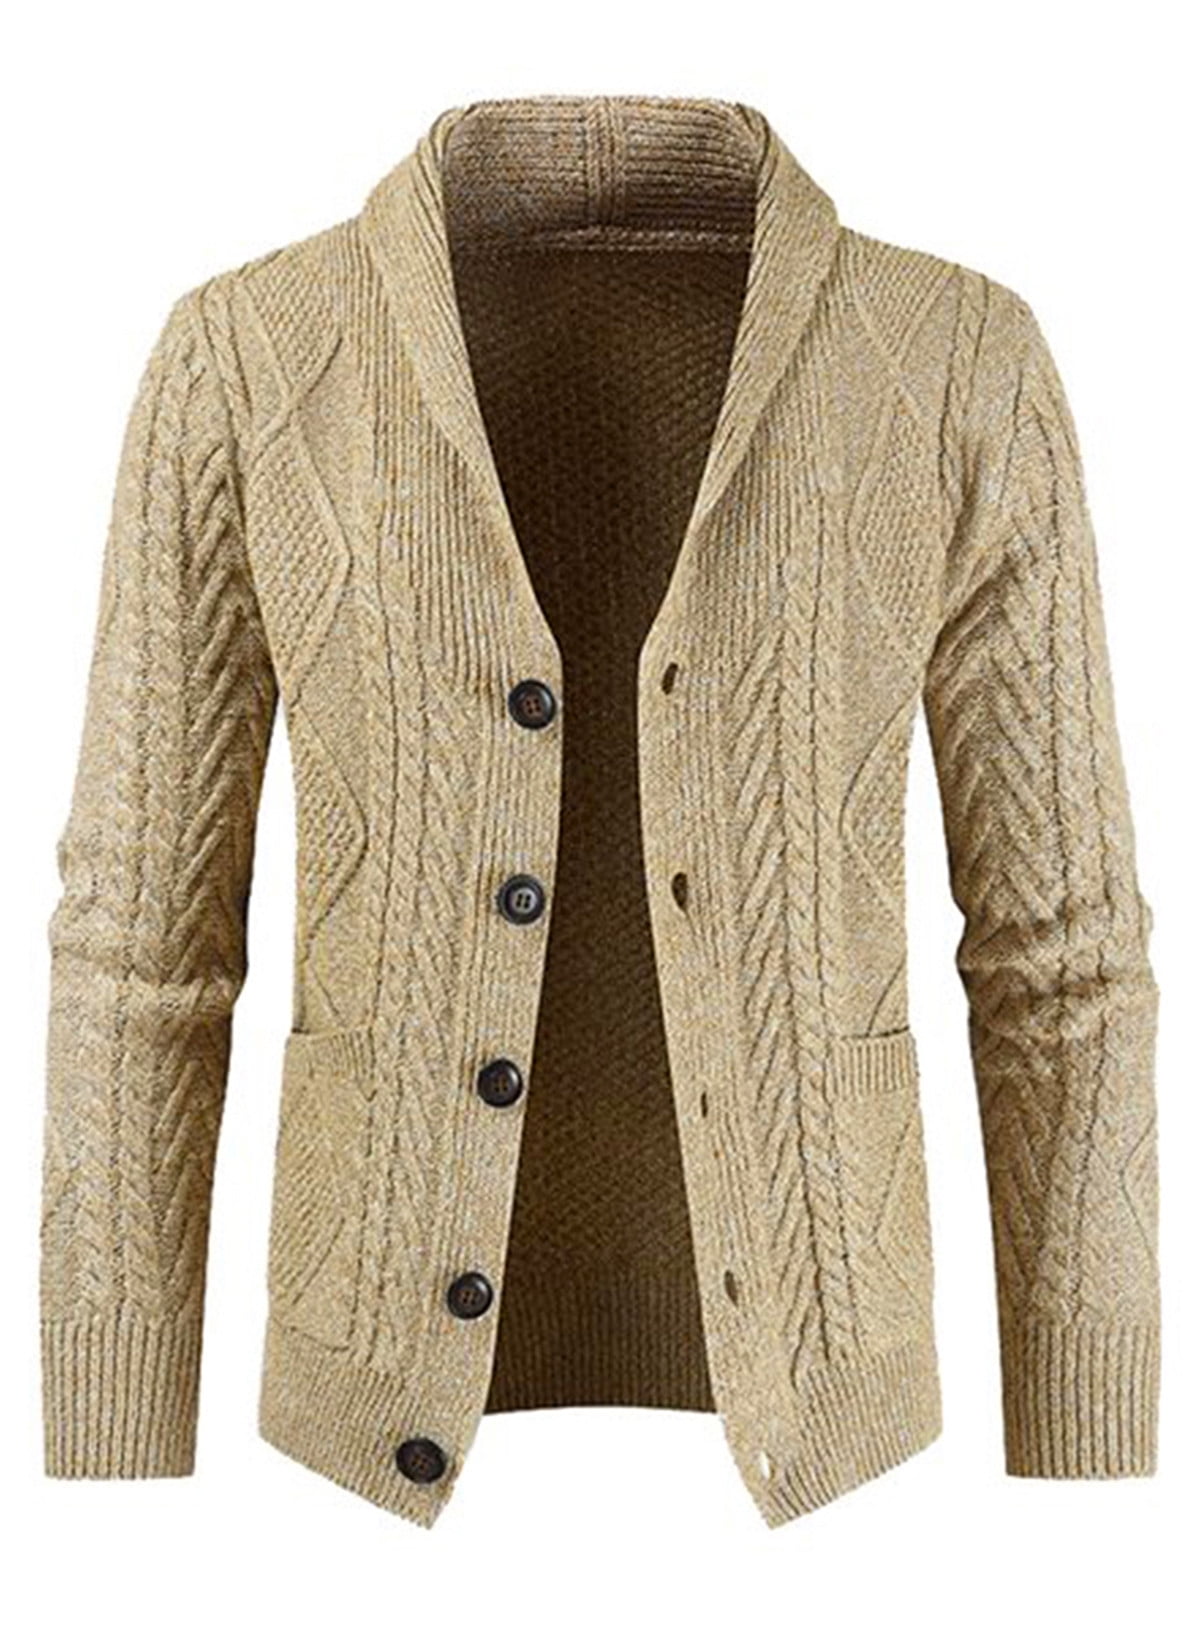 Men's Cable Cardigan w/Pockets-15% Off